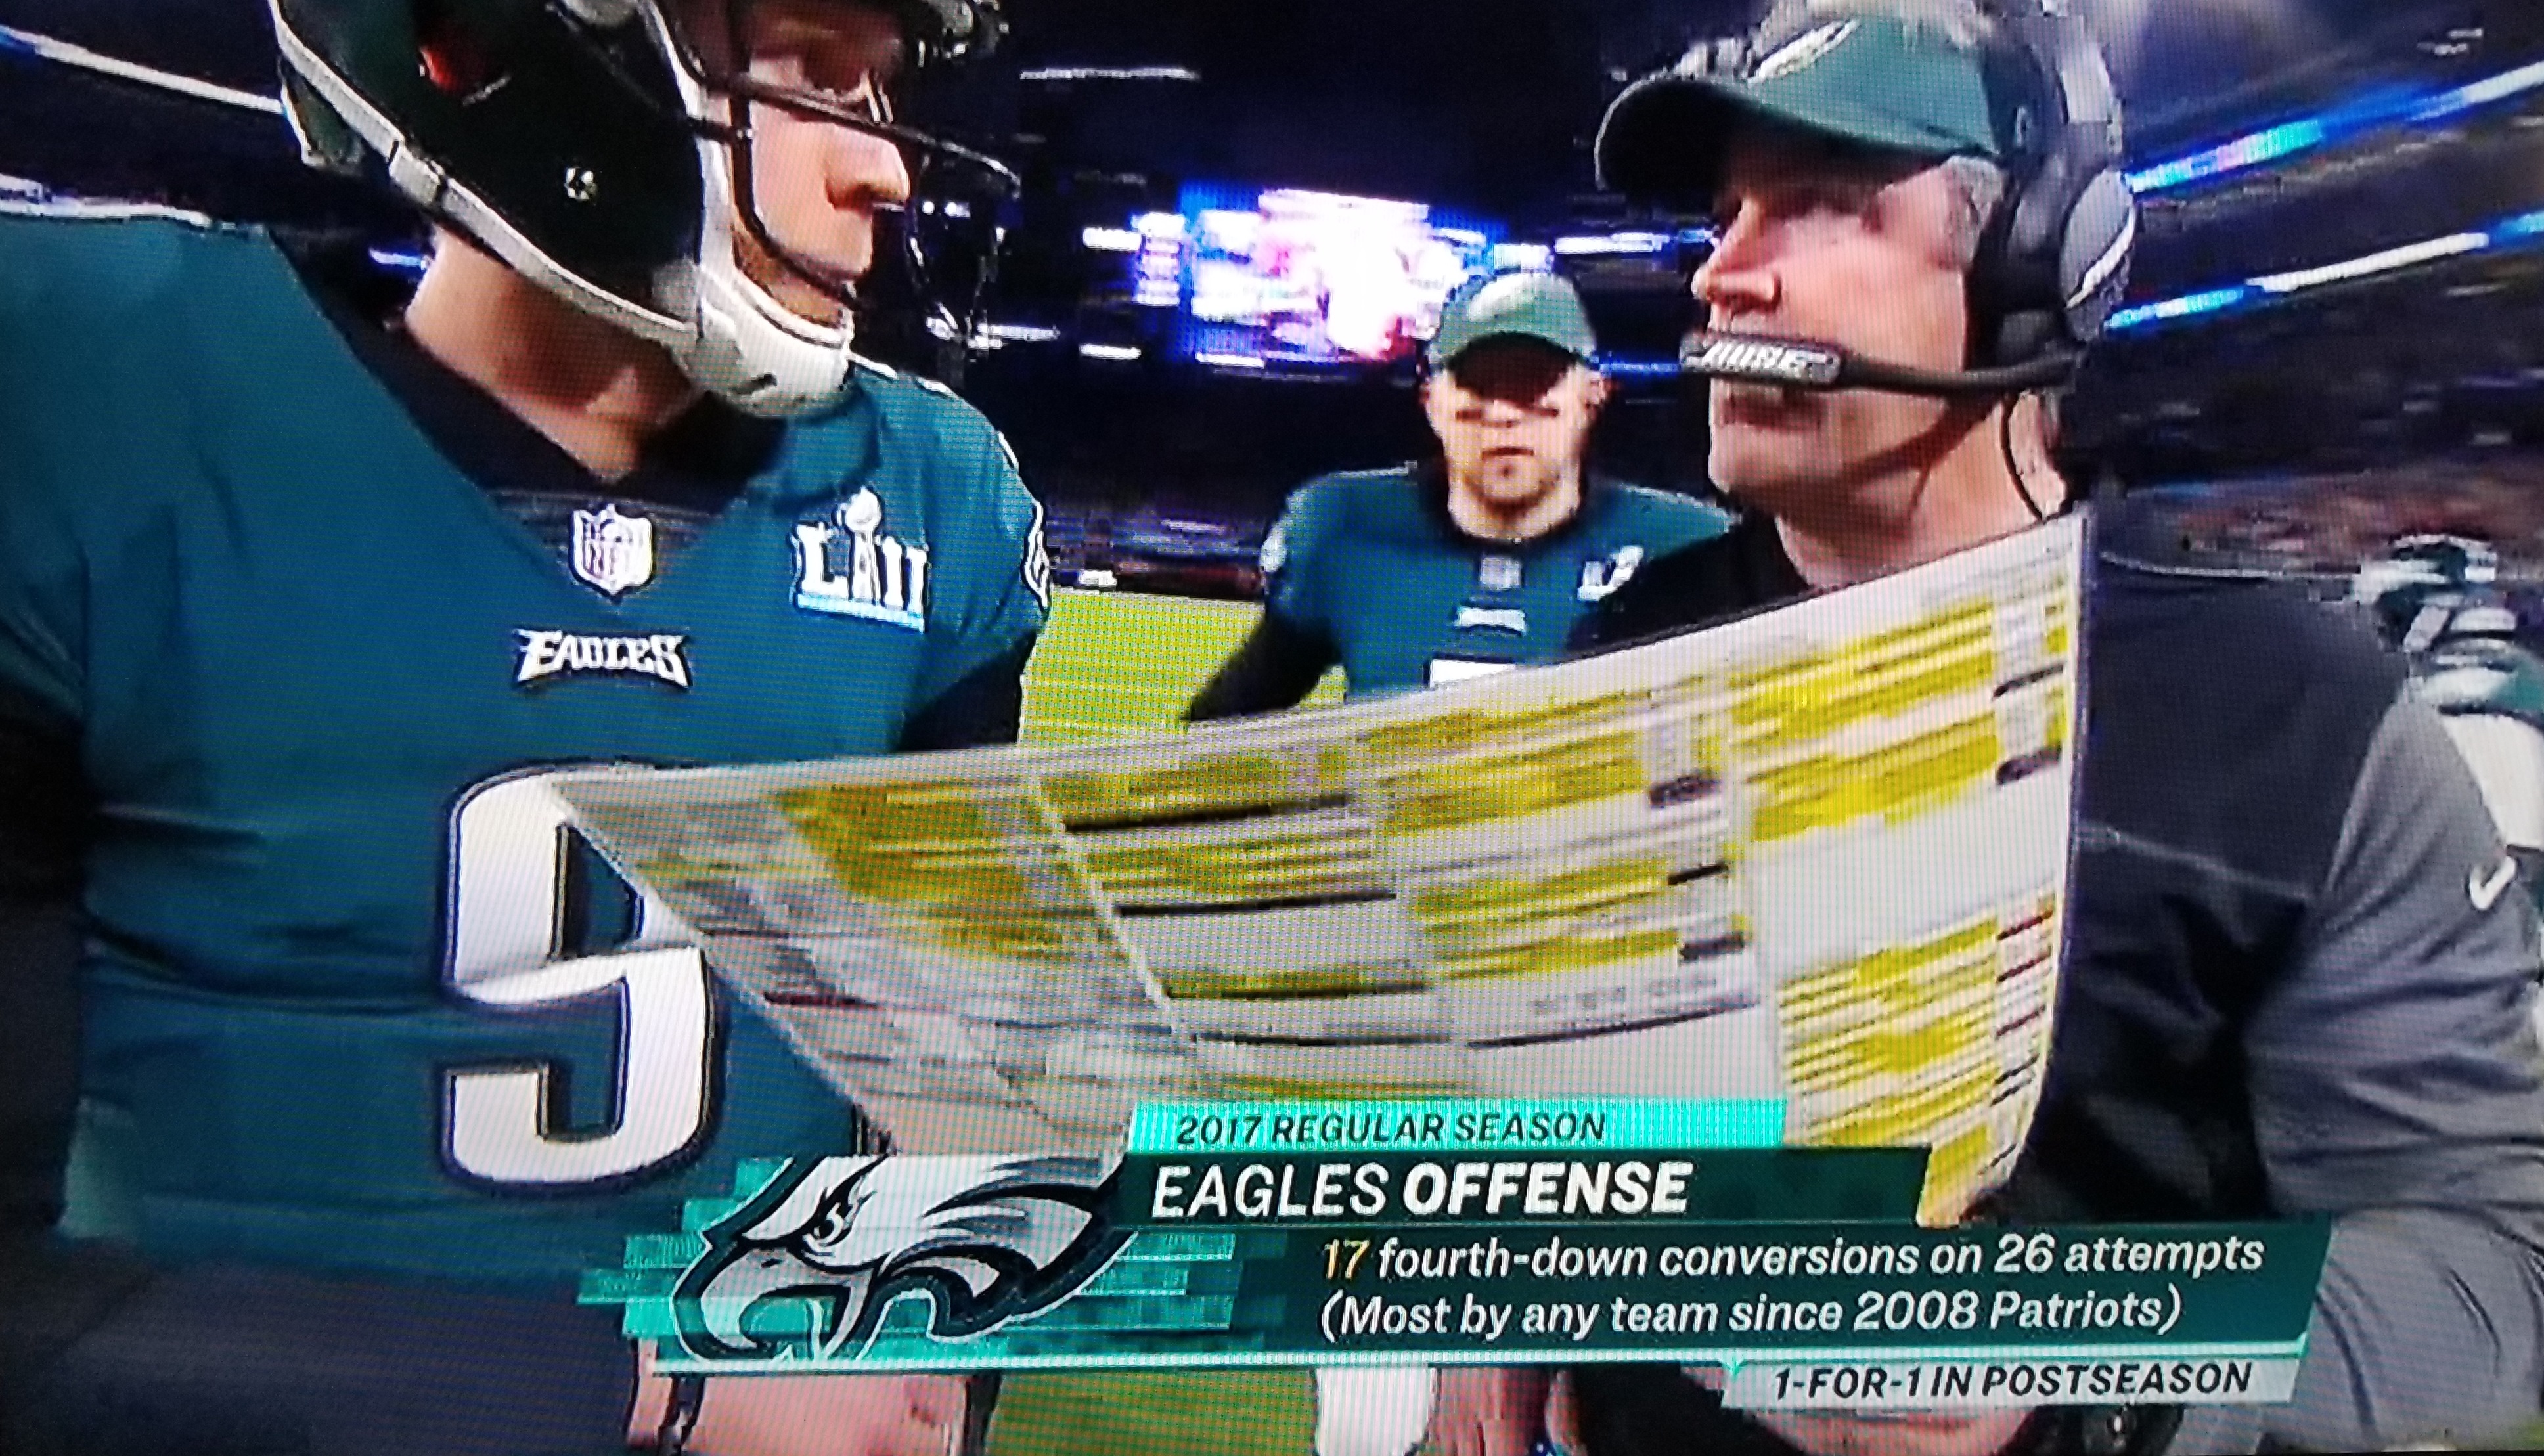 Philly Special! More on the Eagles’ Ballsy Play